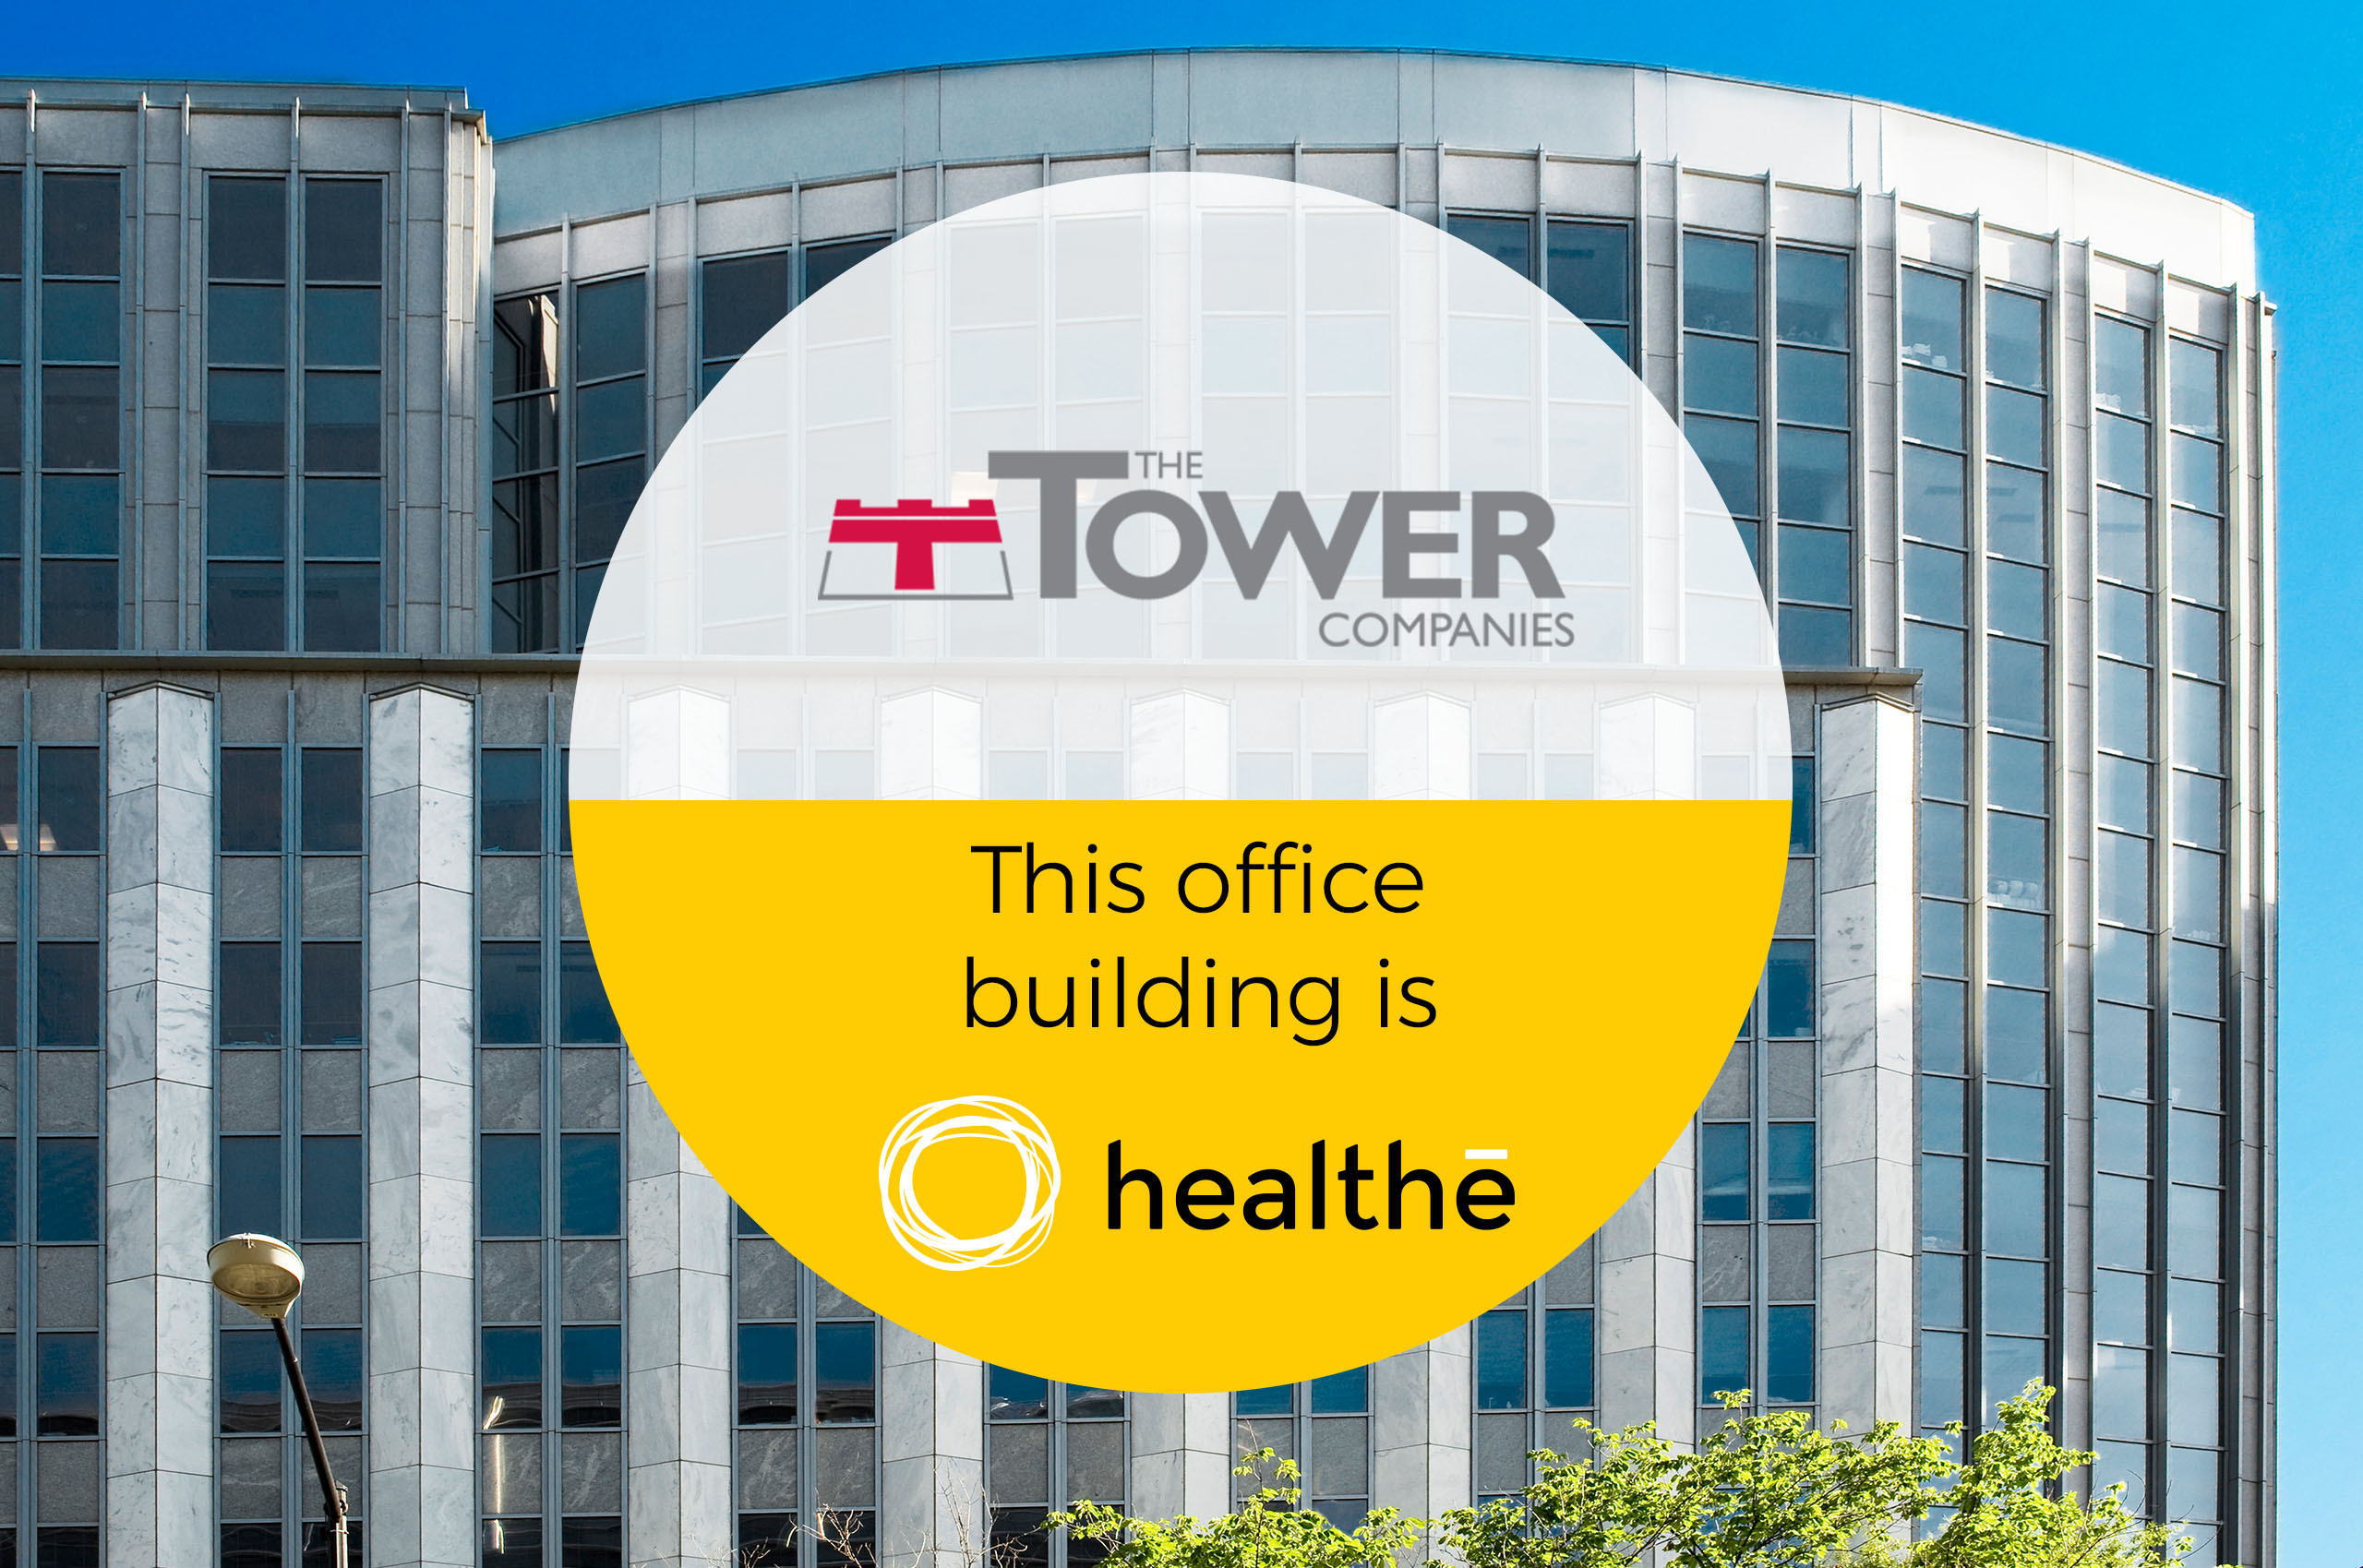 The Tower Companies announced that its premier 1909 K Street property, The Millennium Building, is the first office building in Washington, D.C. to install Healthe's revolutionary, sanitizing technology using Far-UVC 222nm light. 